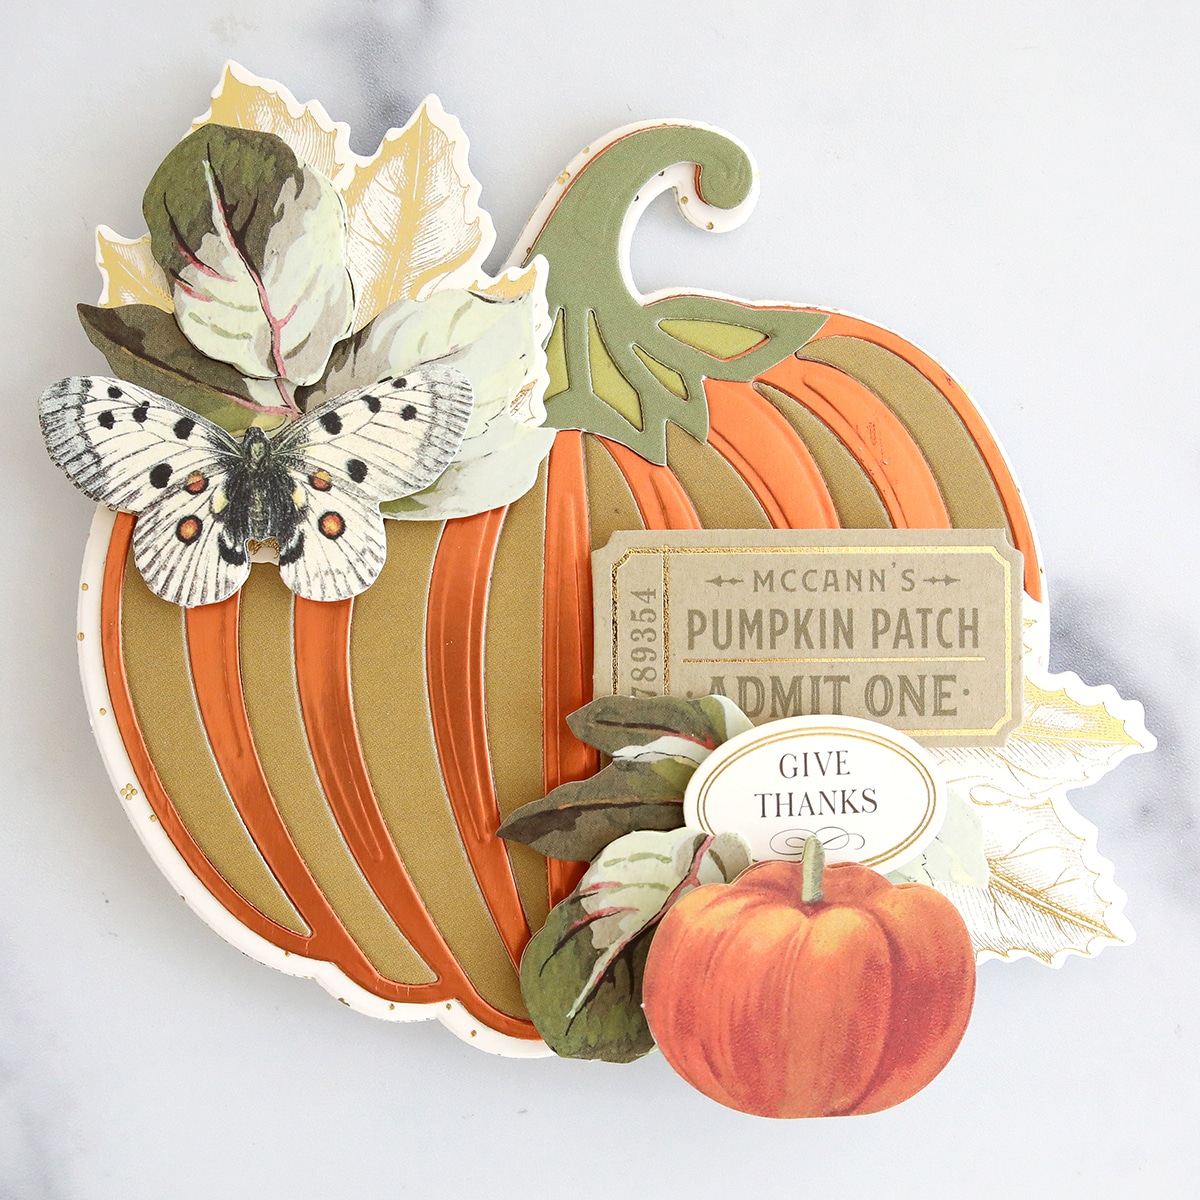 A card with a pumpkin and butterflies on it.